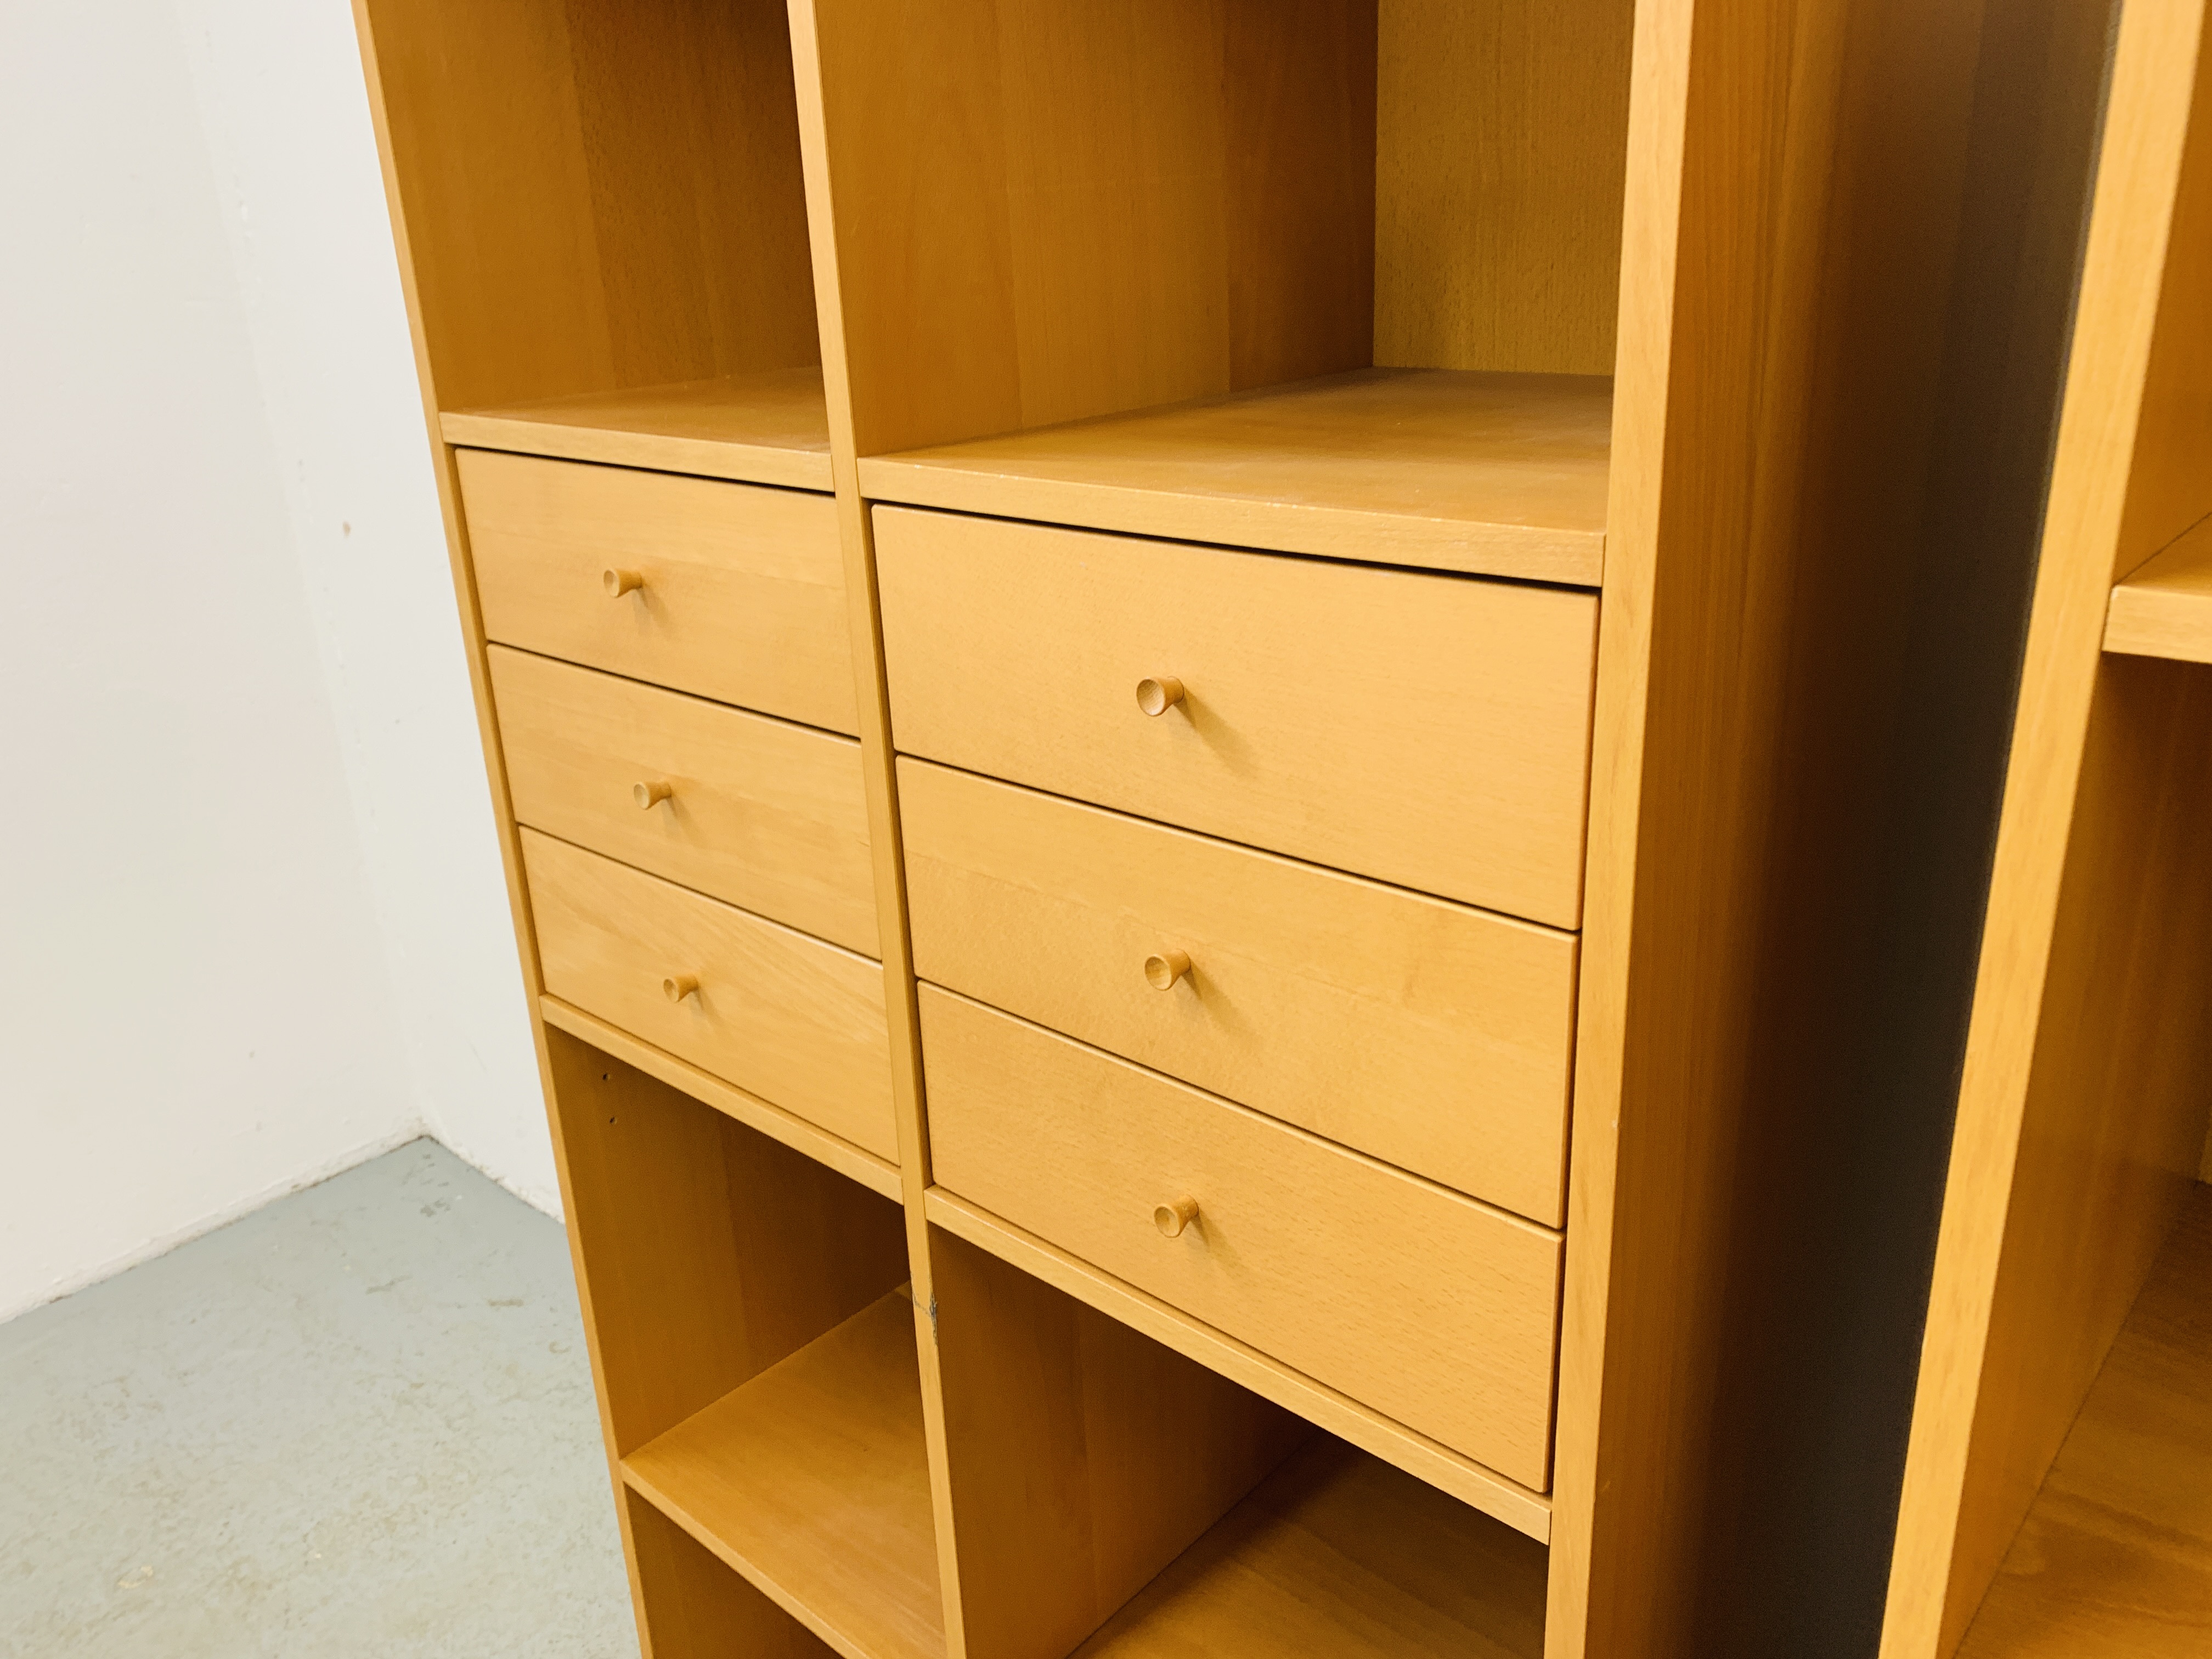 TWO MODERN BEECHWOOD FINISH HOME STORAGE UNITS EACH WIDTH 72CM. DEPTH 42CM. HEIGHT 146CM. - Image 4 of 9